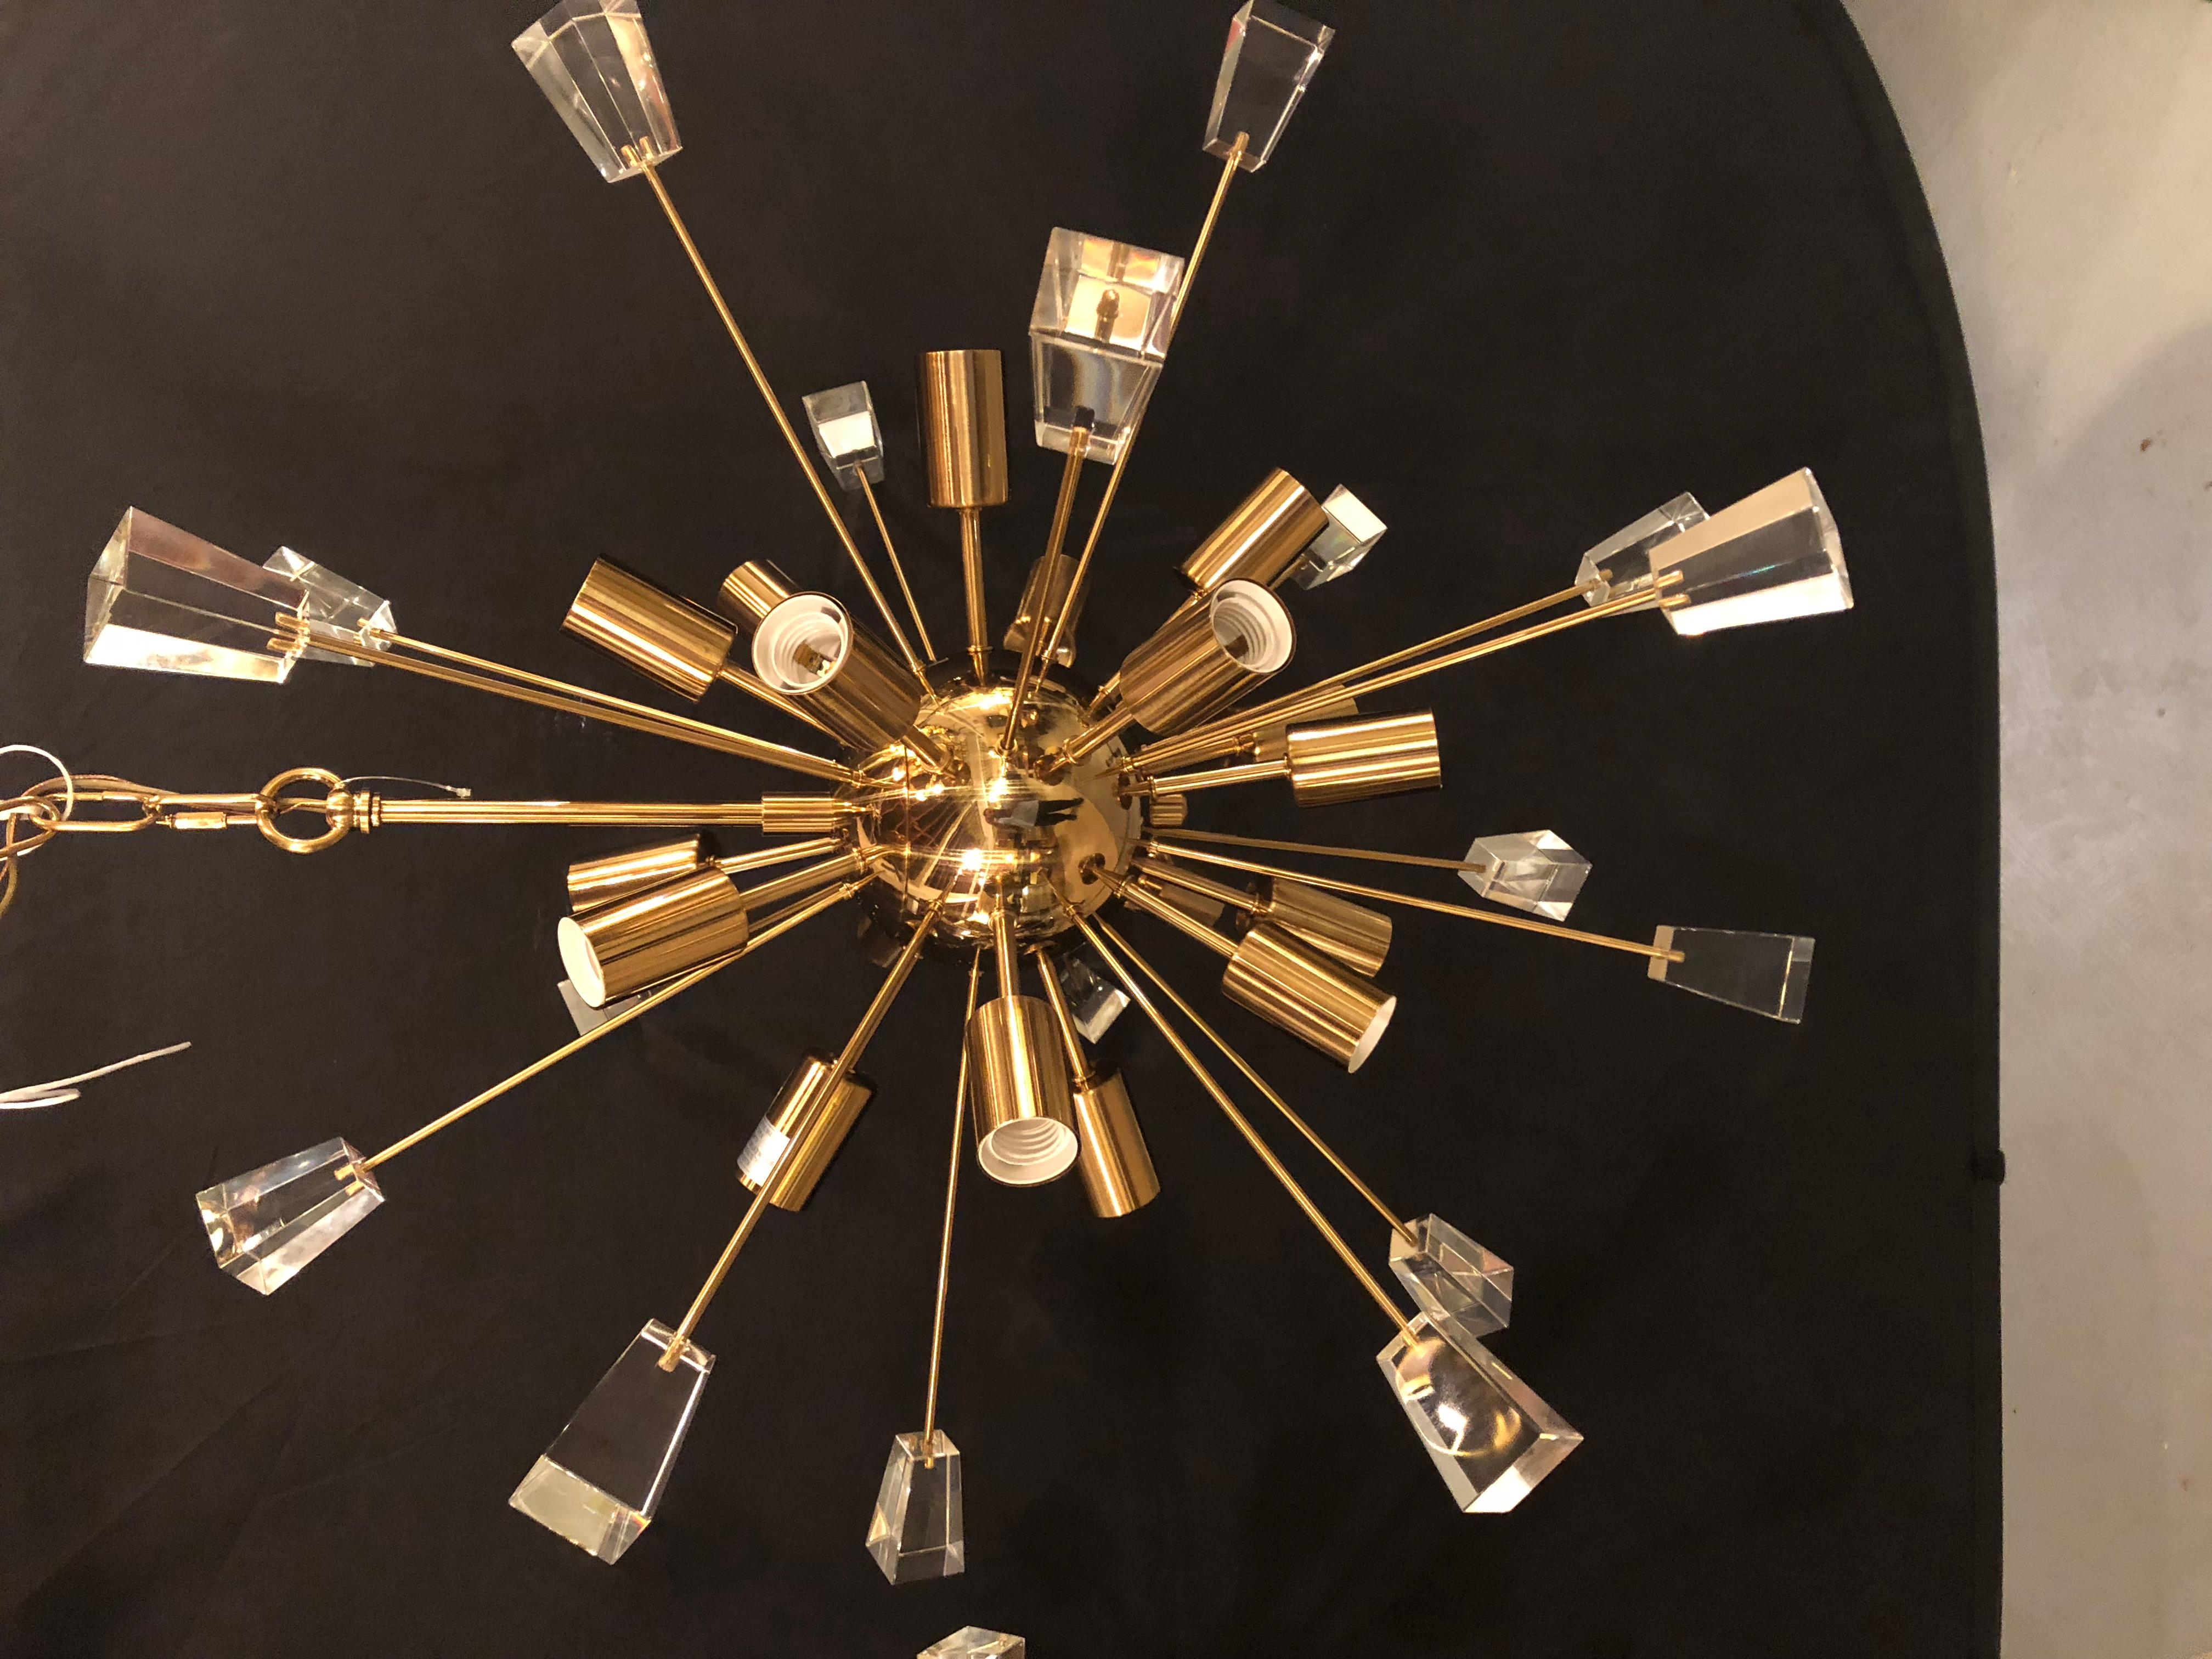 A pair of brass 18-light Sputnik chandeliers in the Mid-Century Modern style. We have two pair of these stunning chandeliers one is larger (34 inch diameter) than the pair in this listing. This pair come with a matching canopy and a chain that is